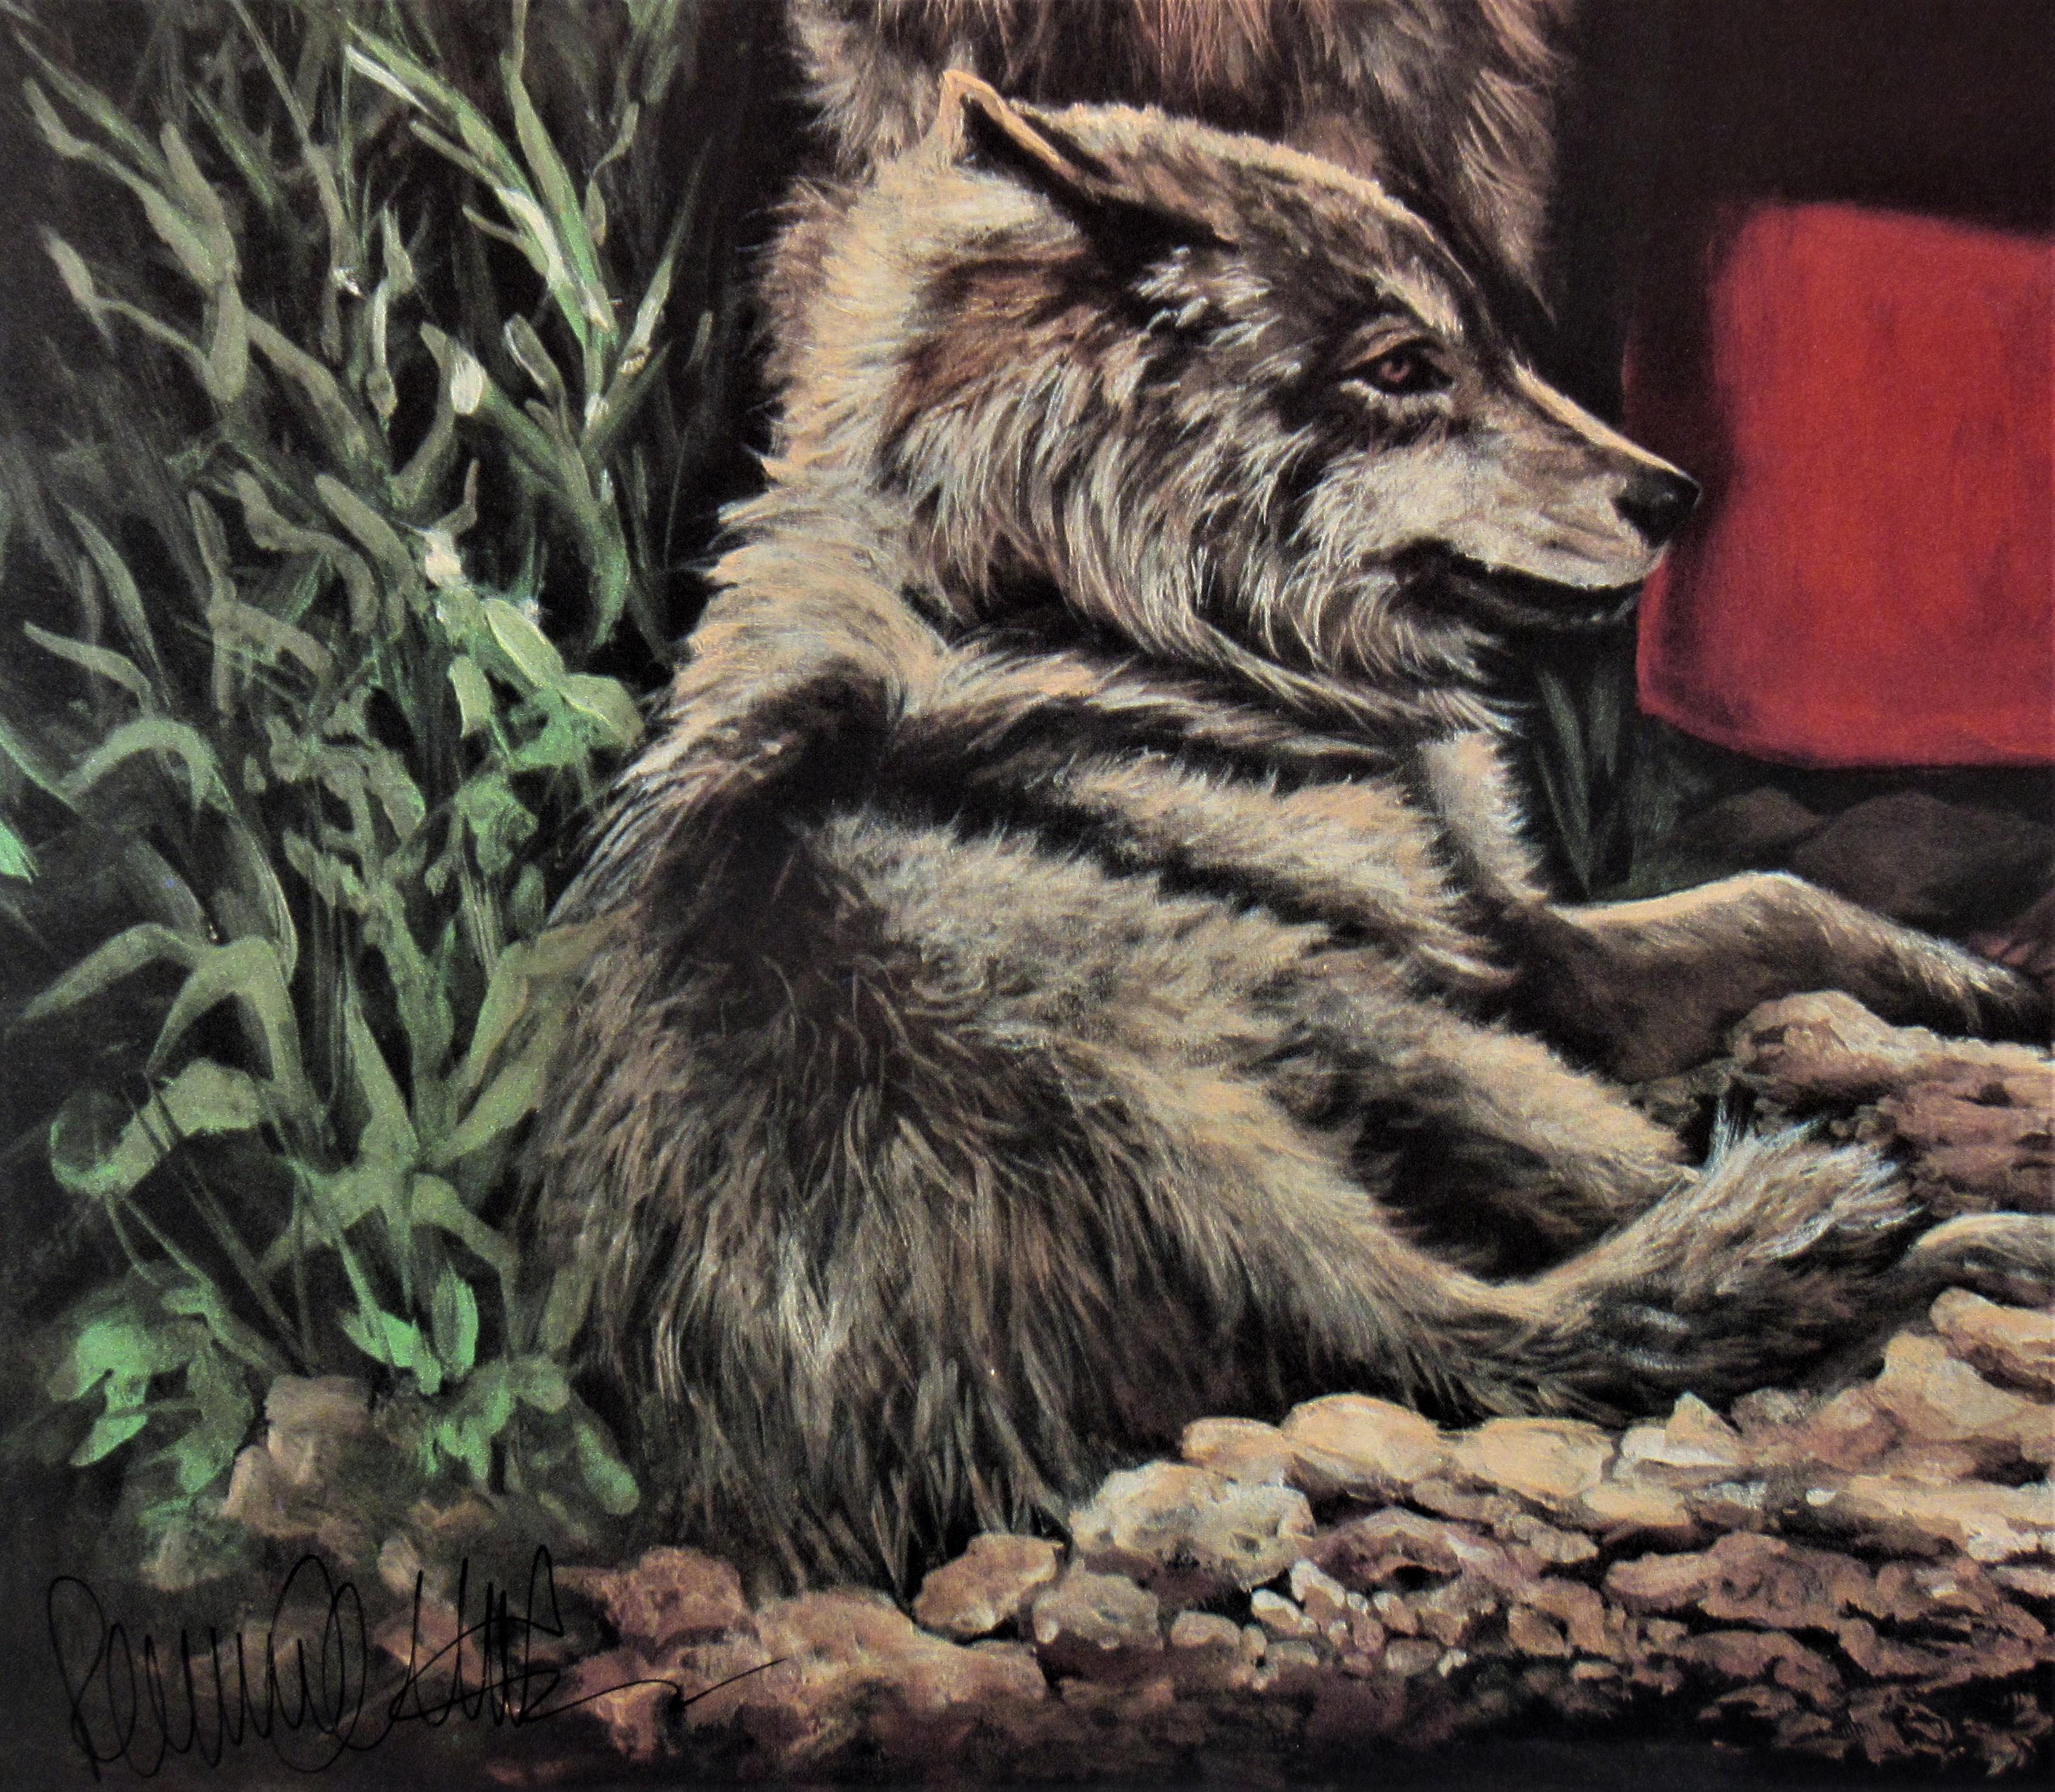  Biagoth Eecuebeh Hehsheesh-Chedah (Red Ridinghood and her Wolves) - Realist Print by Penni Anne Cross